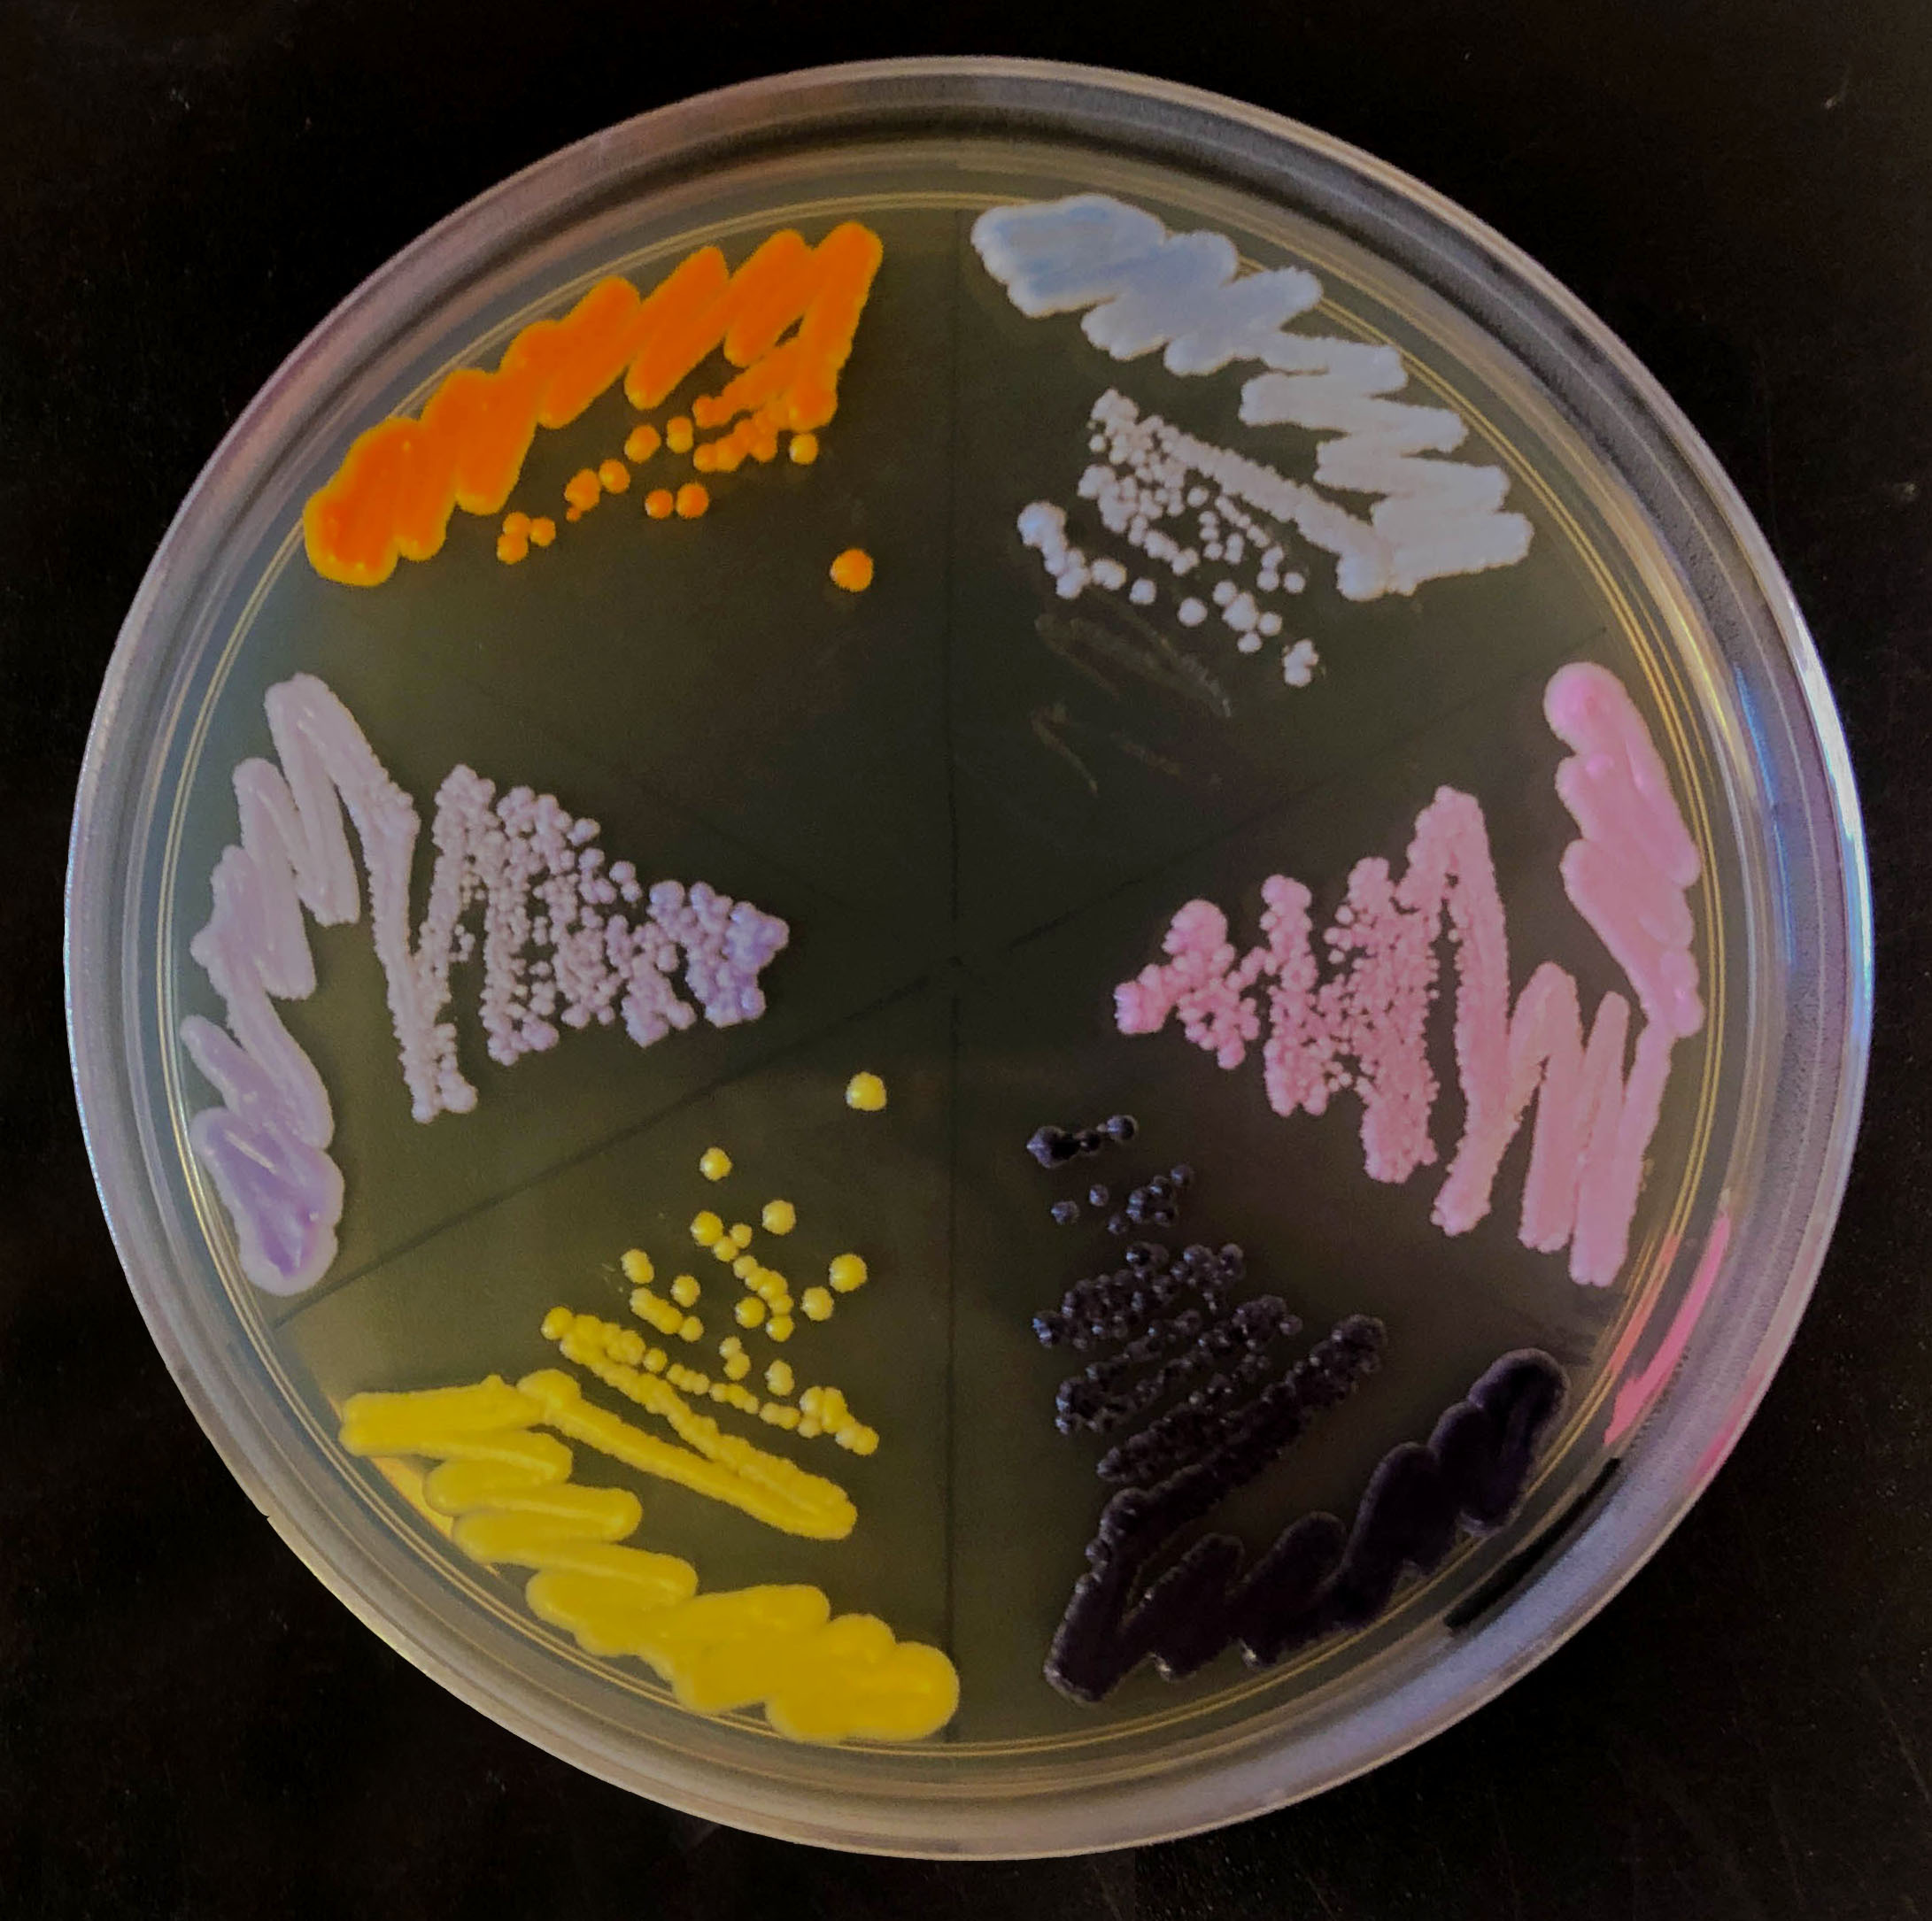 six different colored strains of yeast struck out on an agar plate